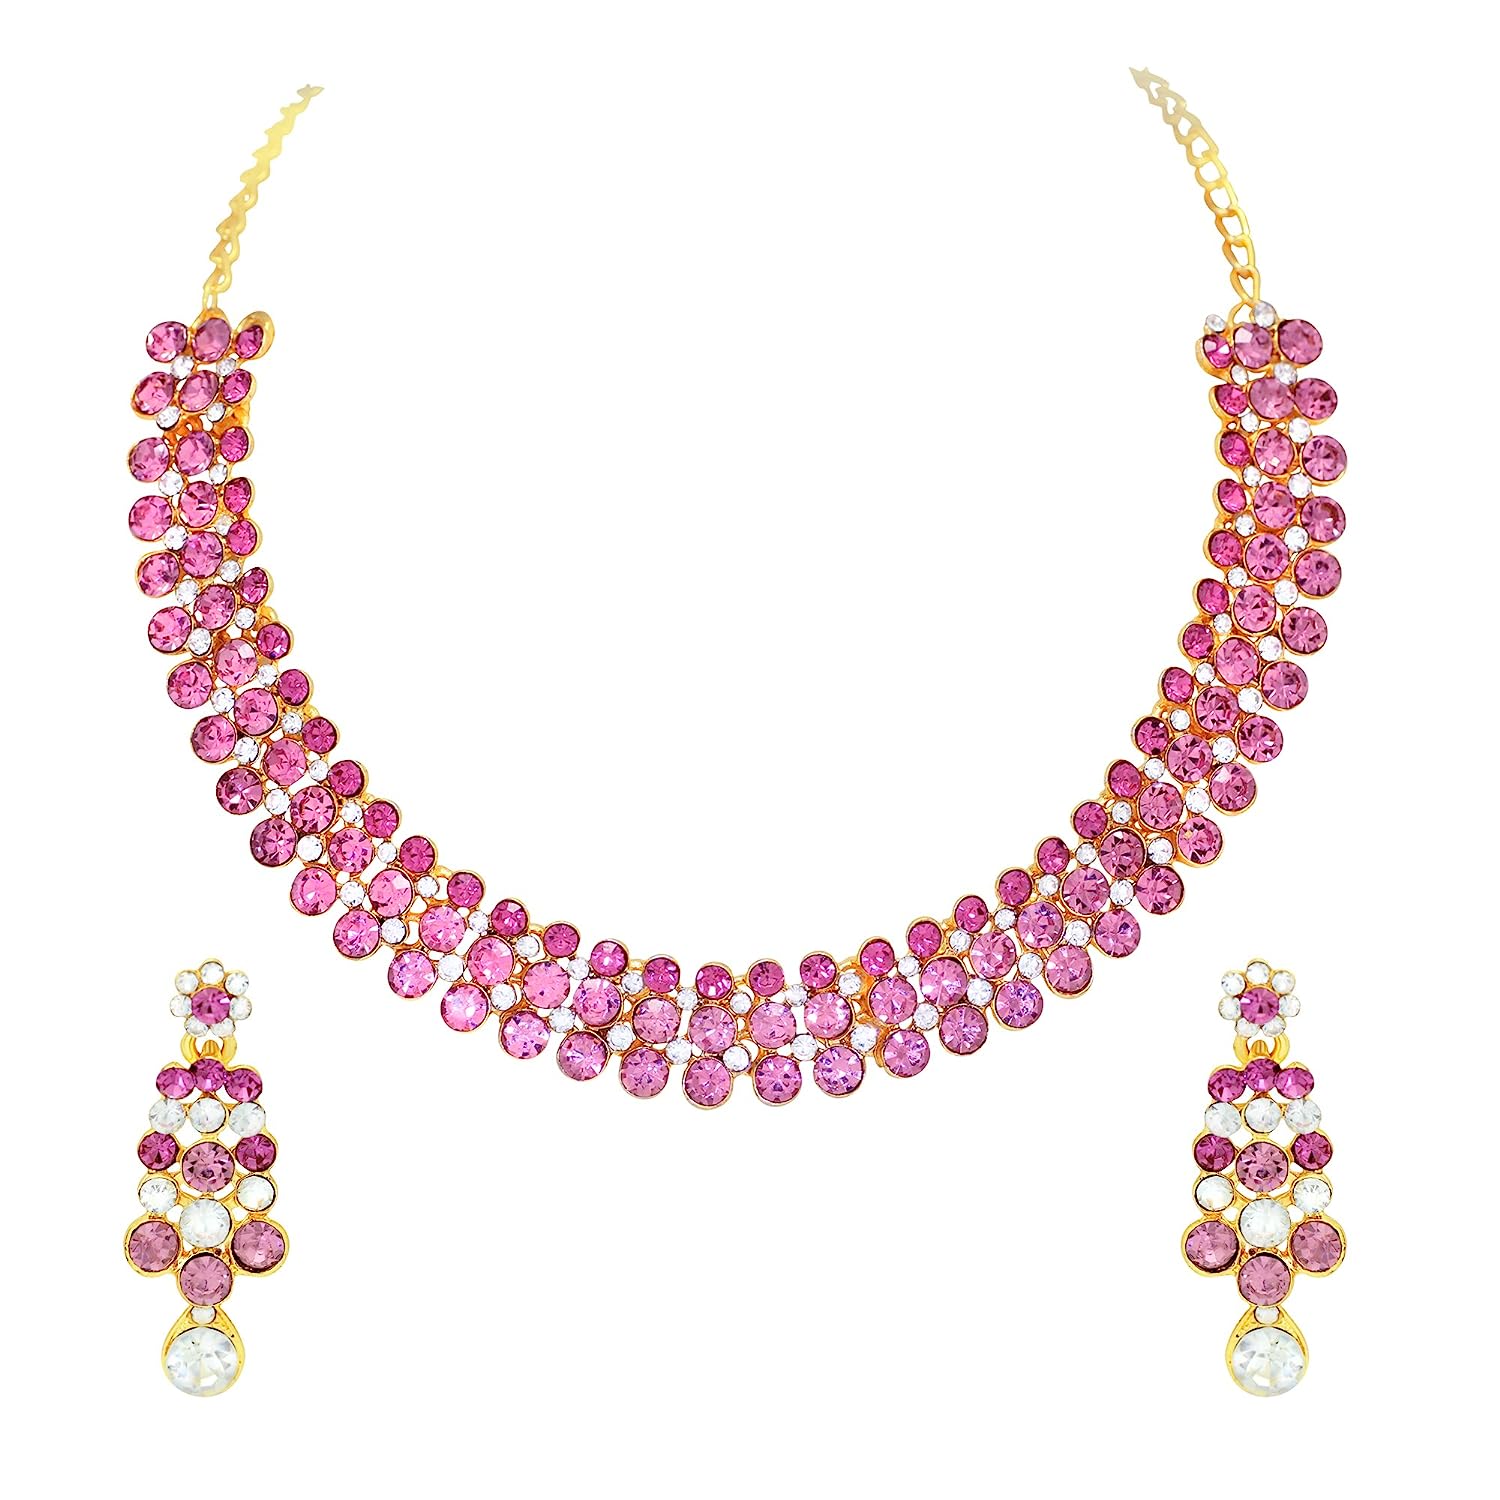 Gold Plated Alloy Choker Necklace Set For Women PINK